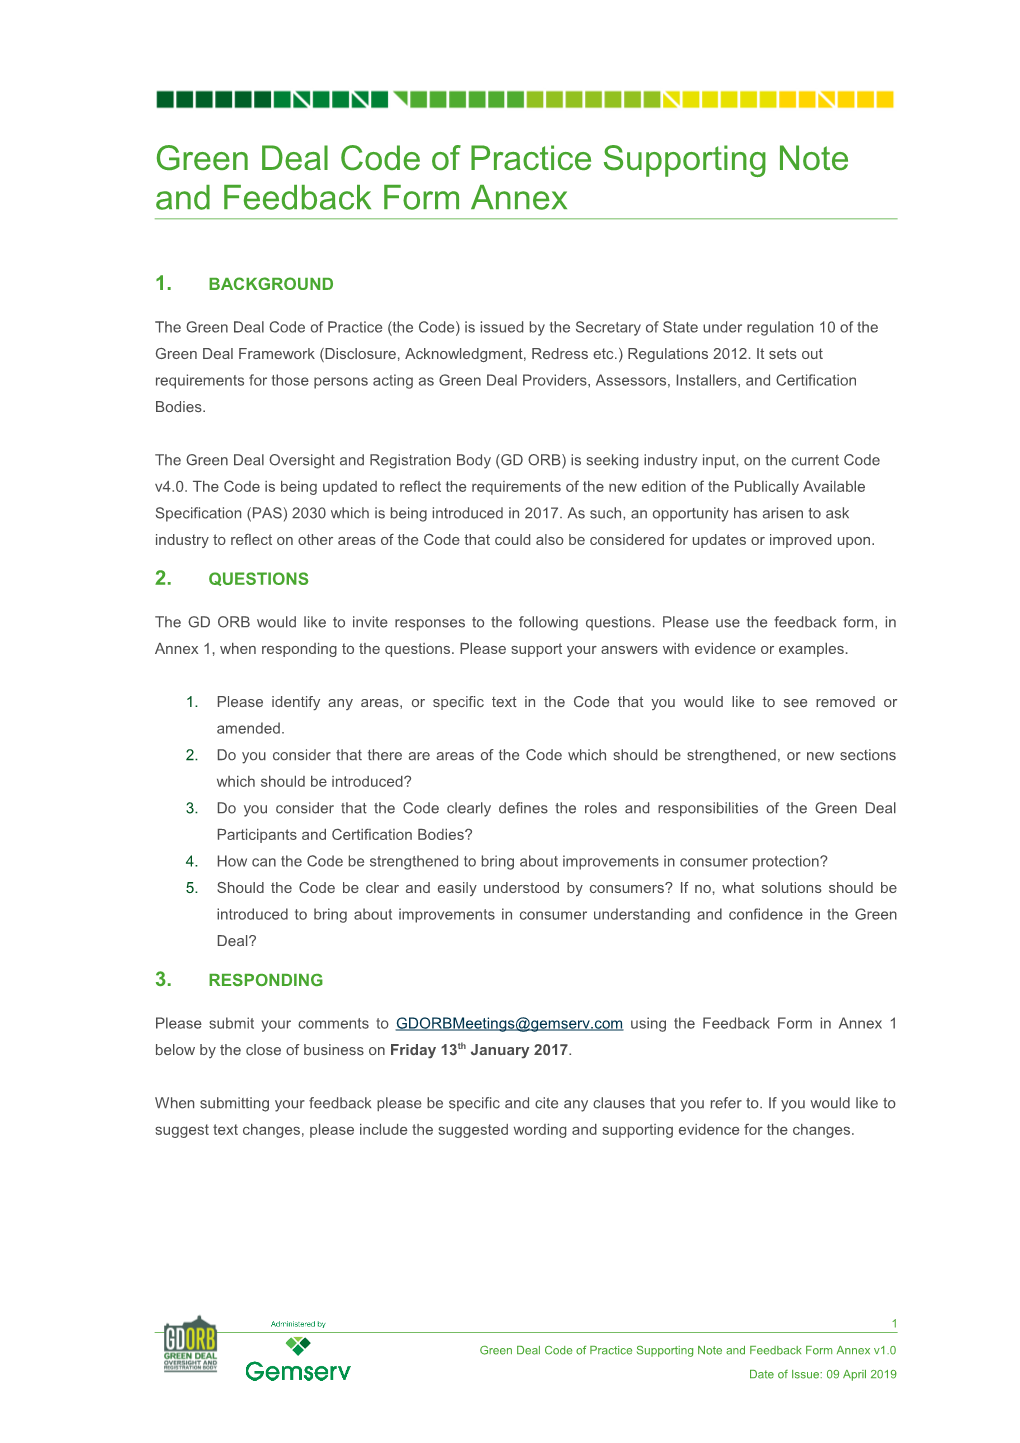 Green Deal Code of Practice Supporting Note and Feedback Form Annex